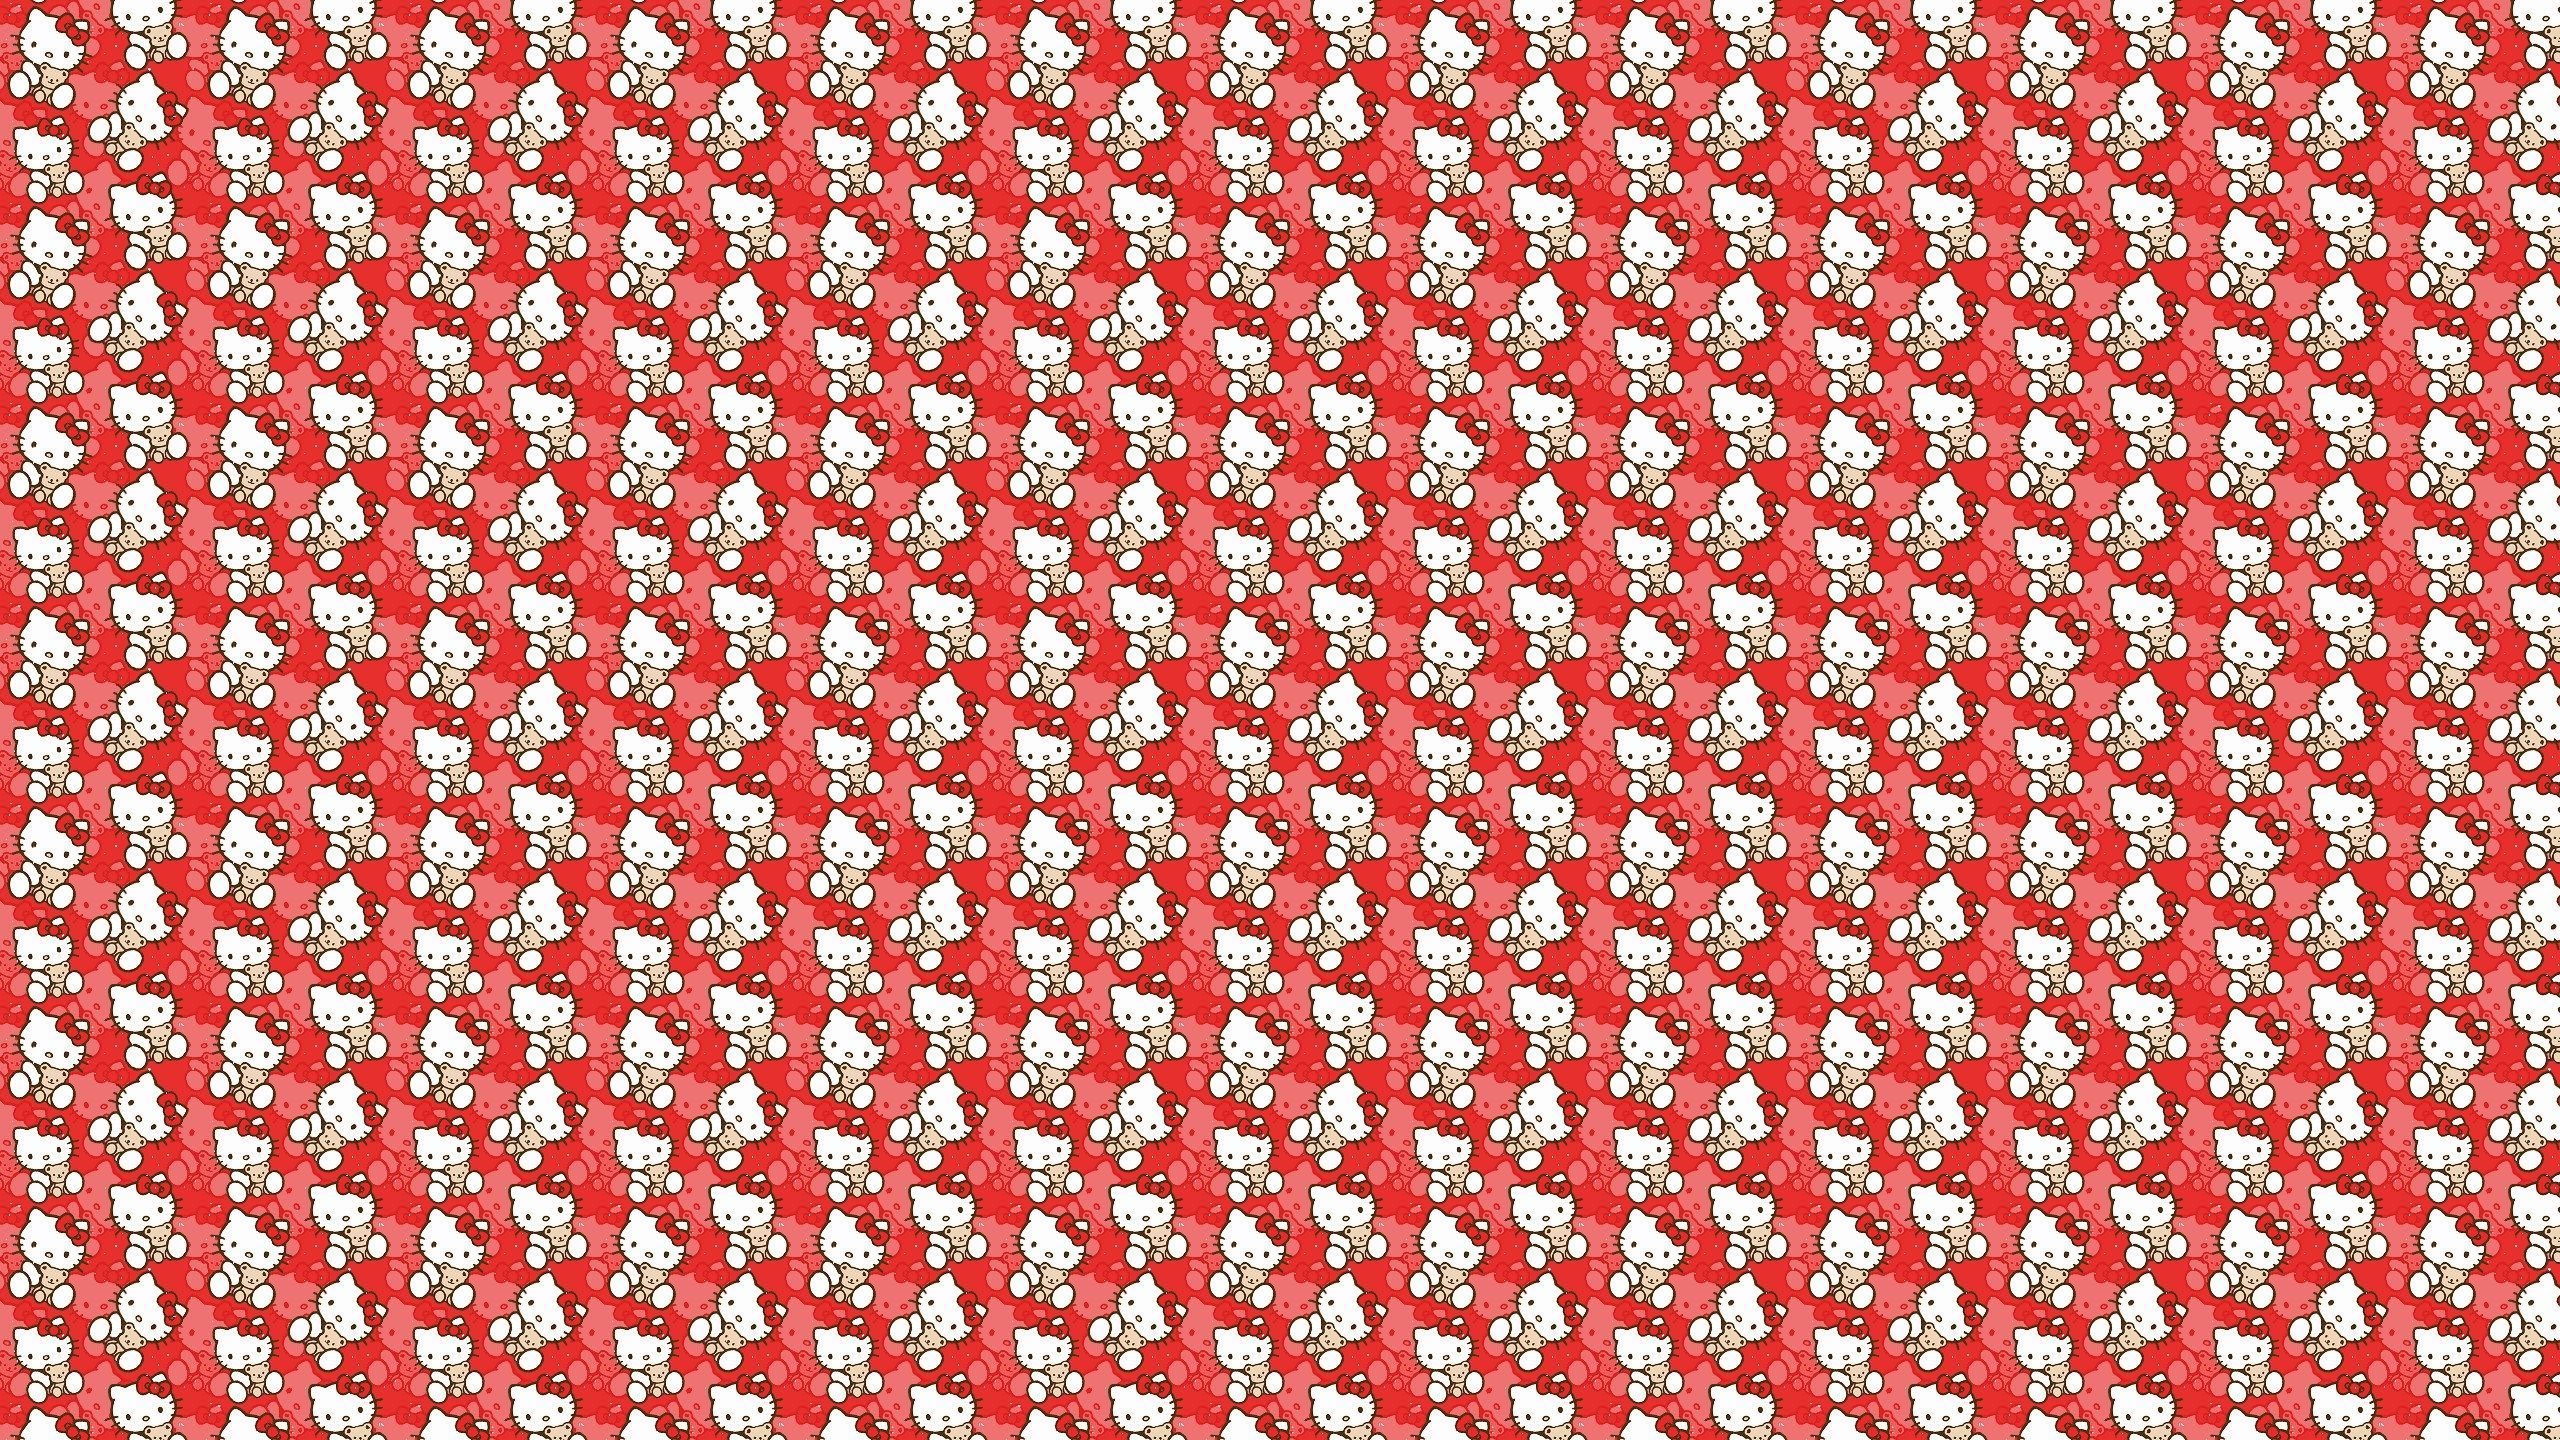 Hello Kitty pattern on a red background - Hello Kitty